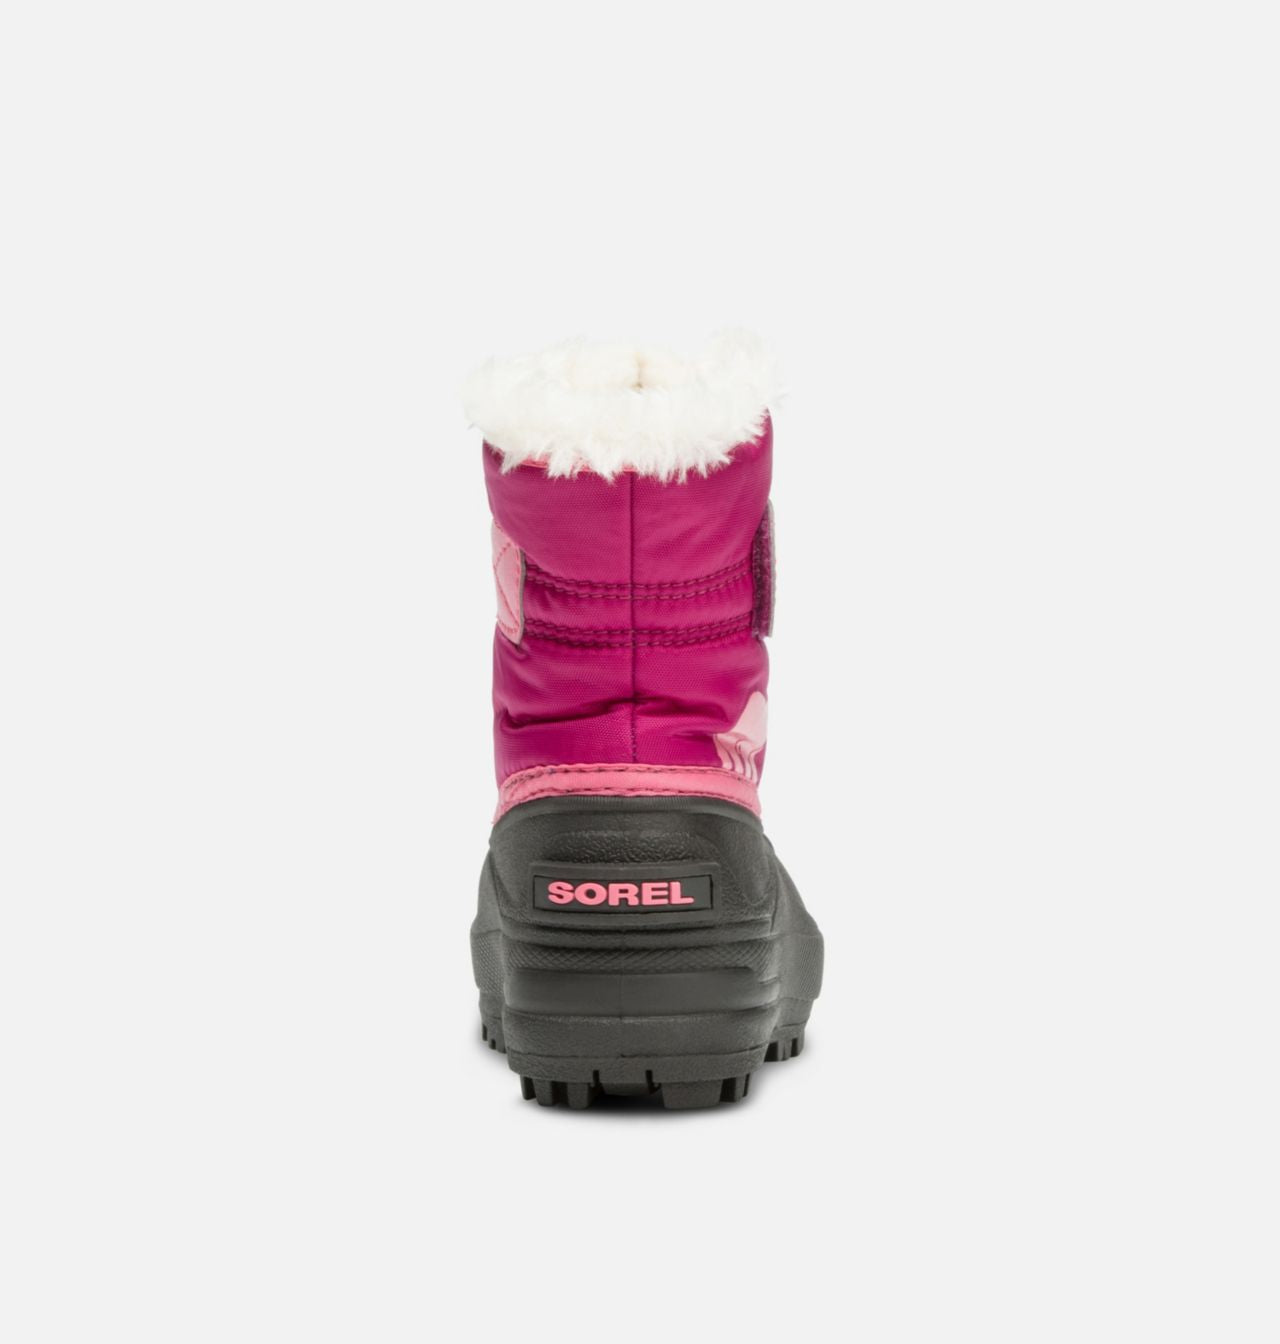 Sorel Snow Commander Kids Snow Boots - Tropic Pink Size 3 only